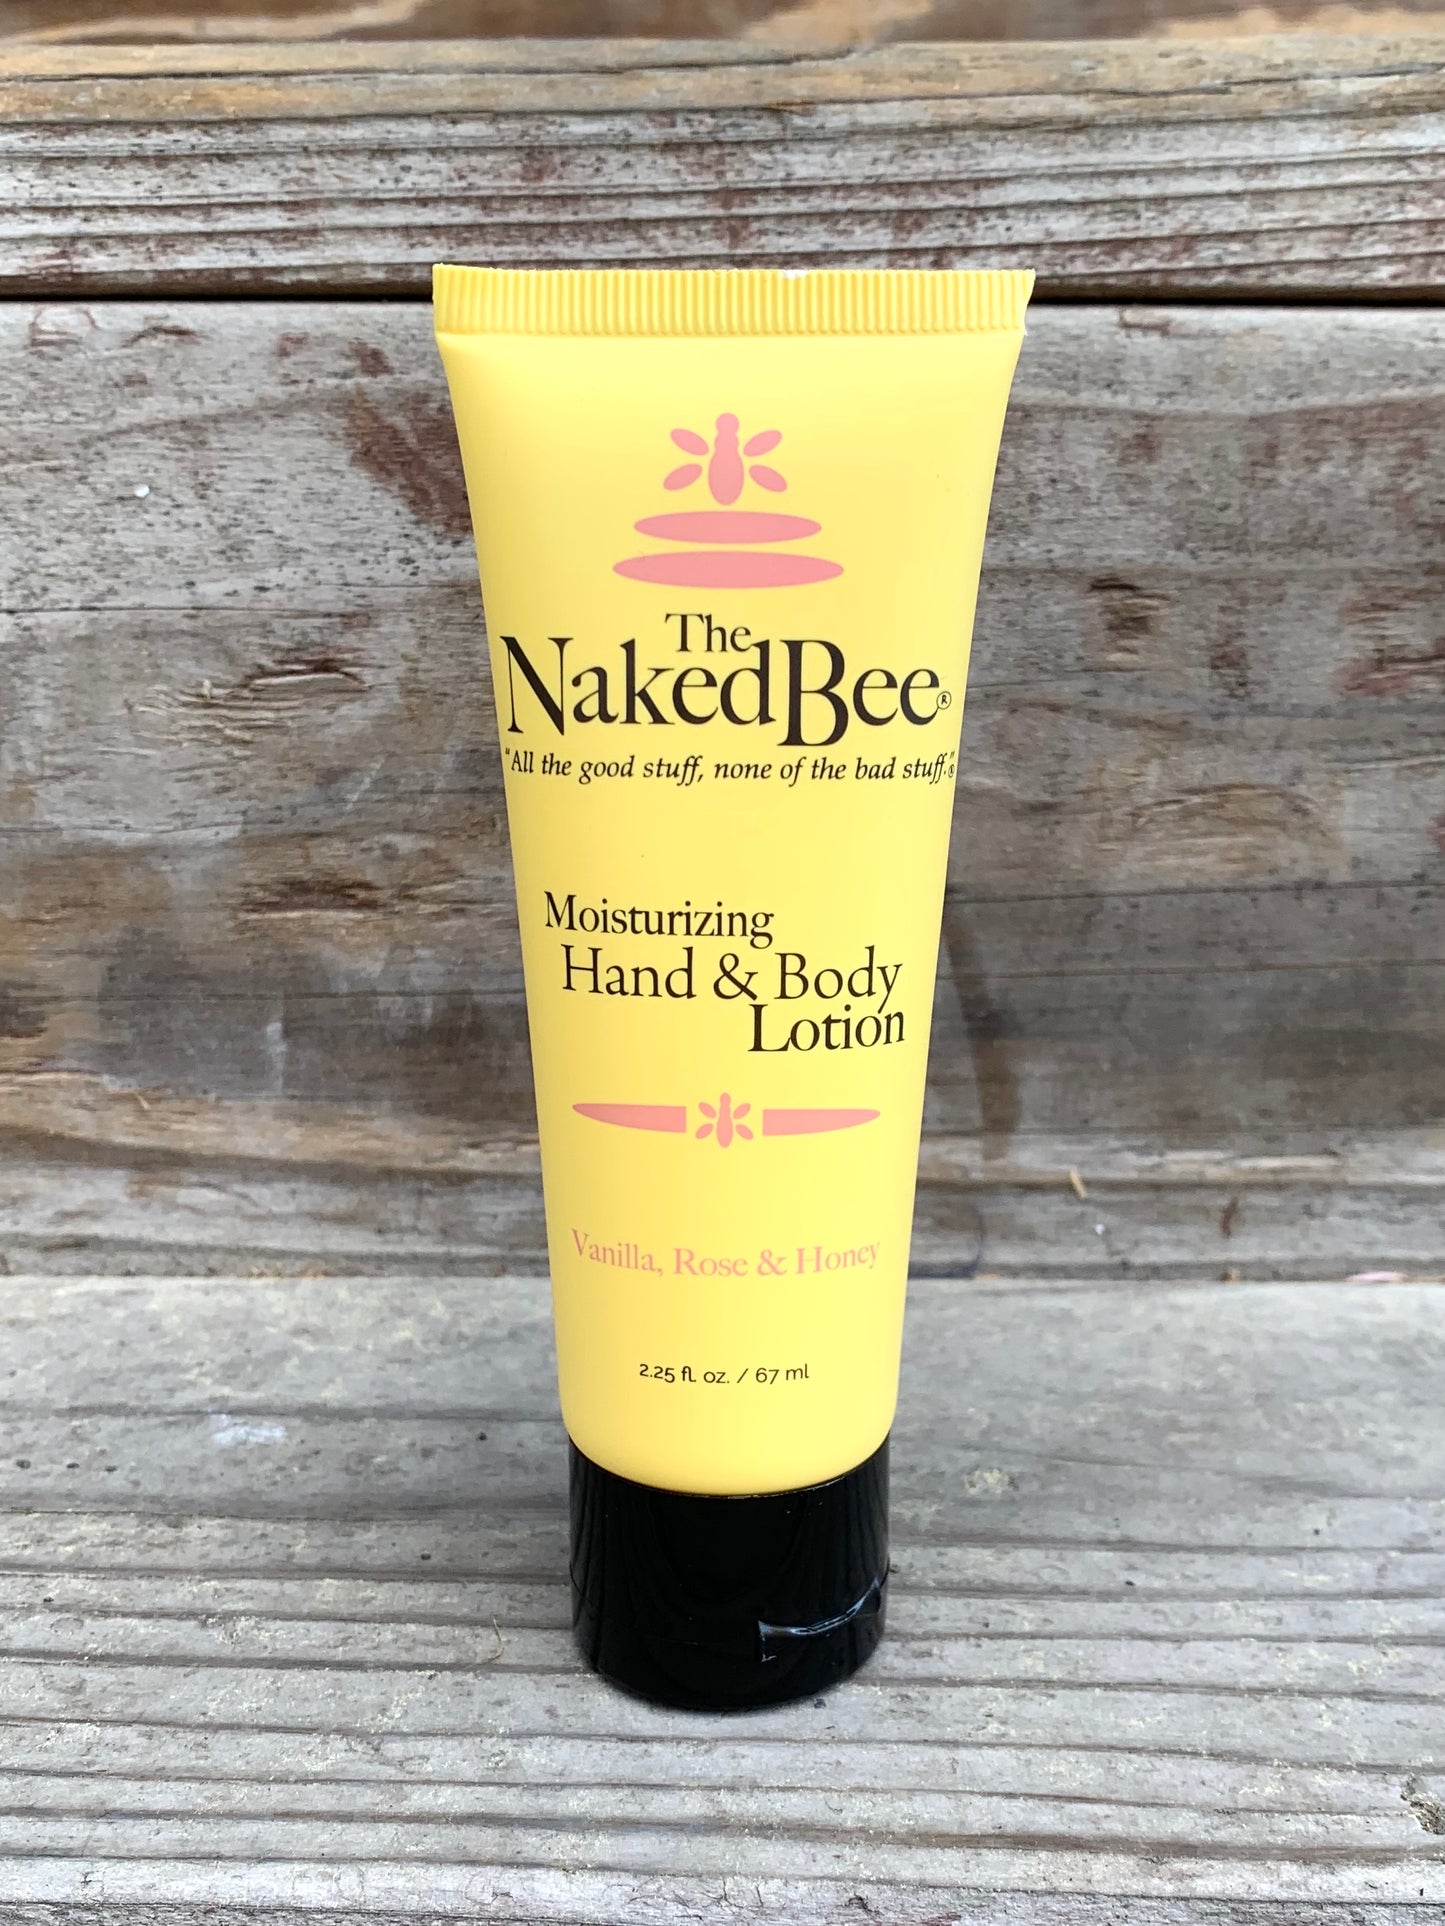 Naked Bee 2.25 oz Lotion